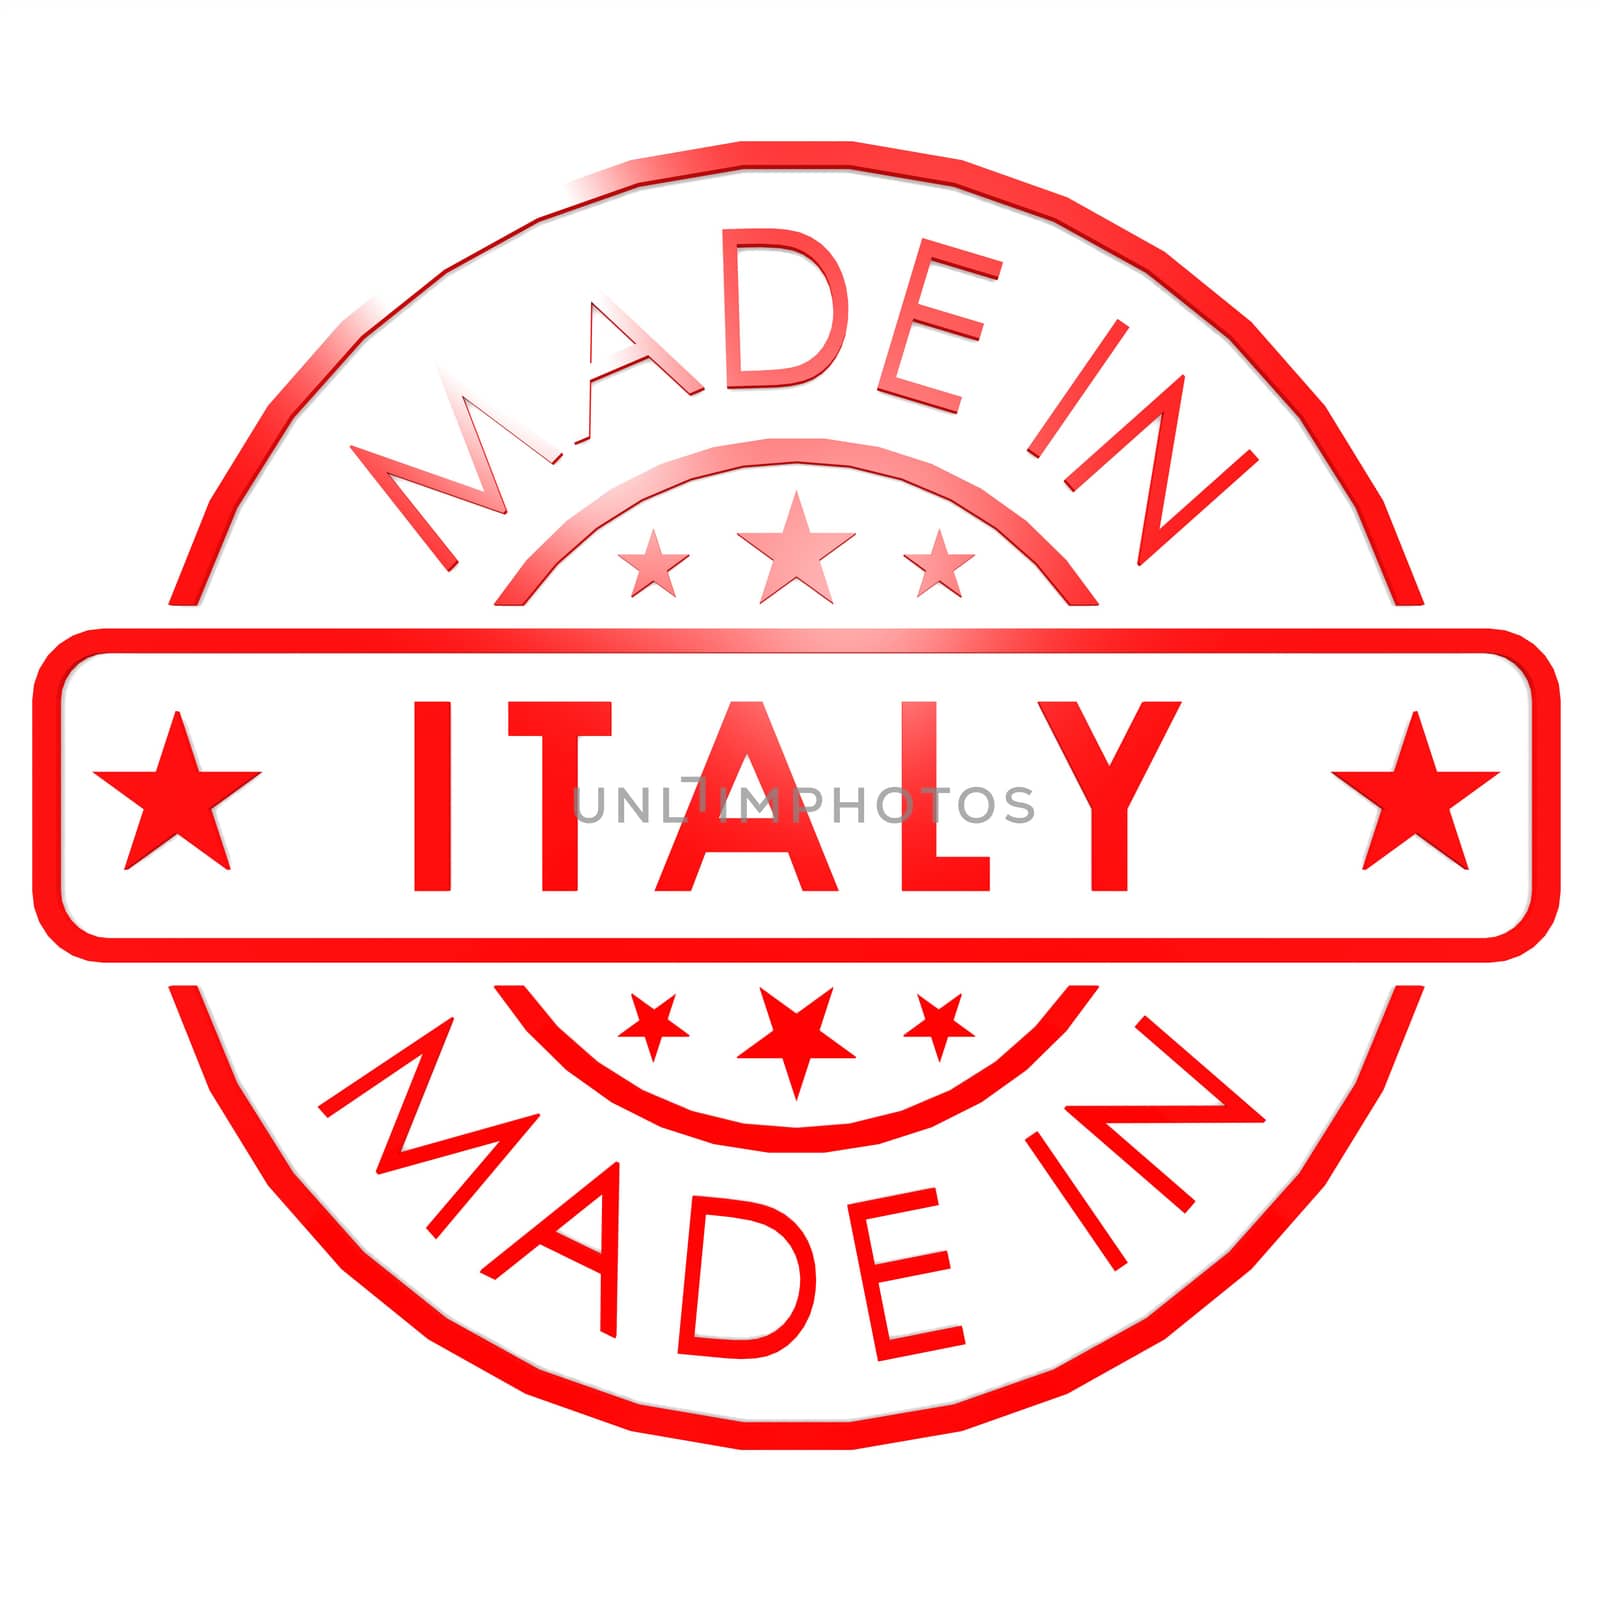 Made in Italy red seal by tang90246